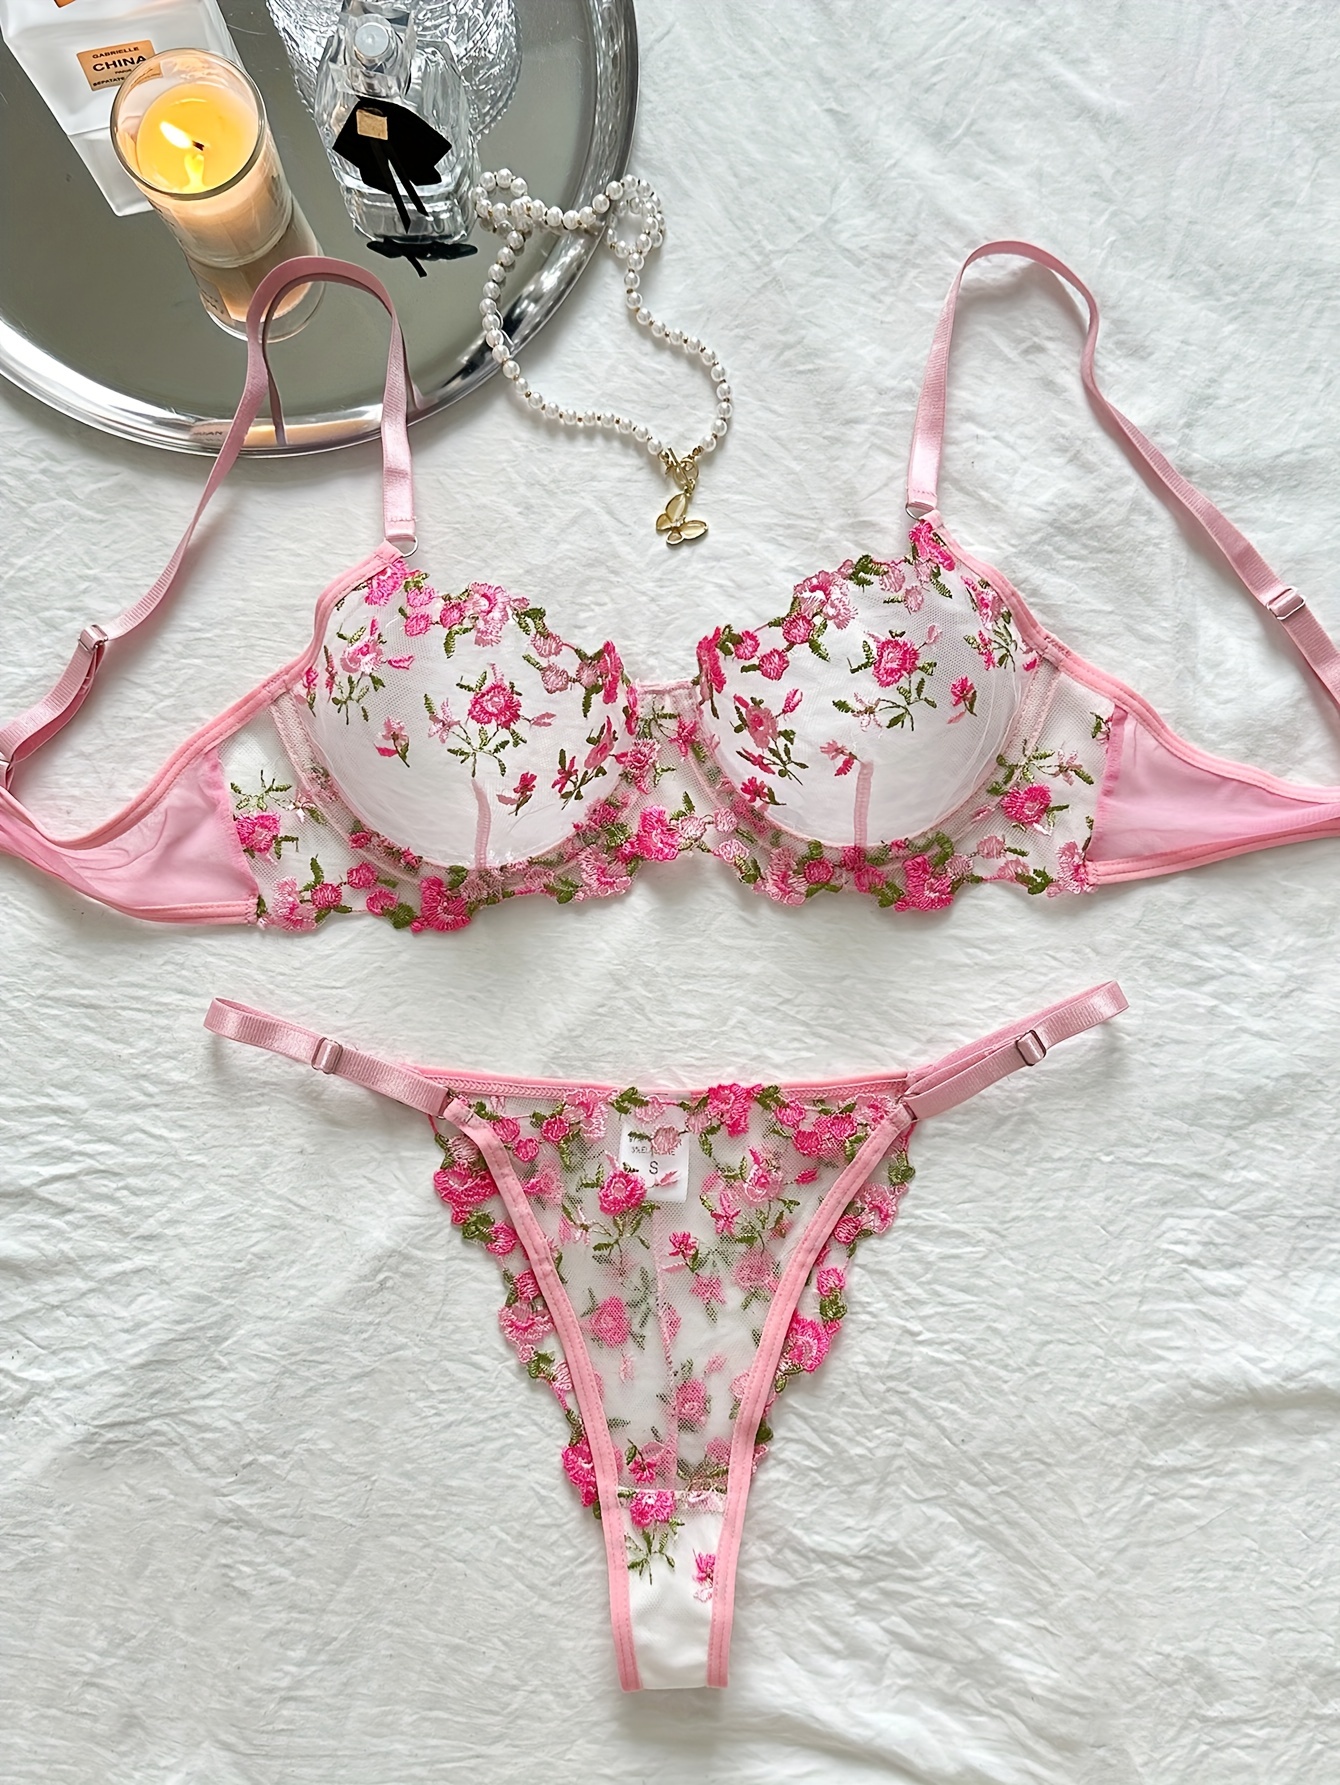 four times dock party floral bra and panty set appear Civic Flash